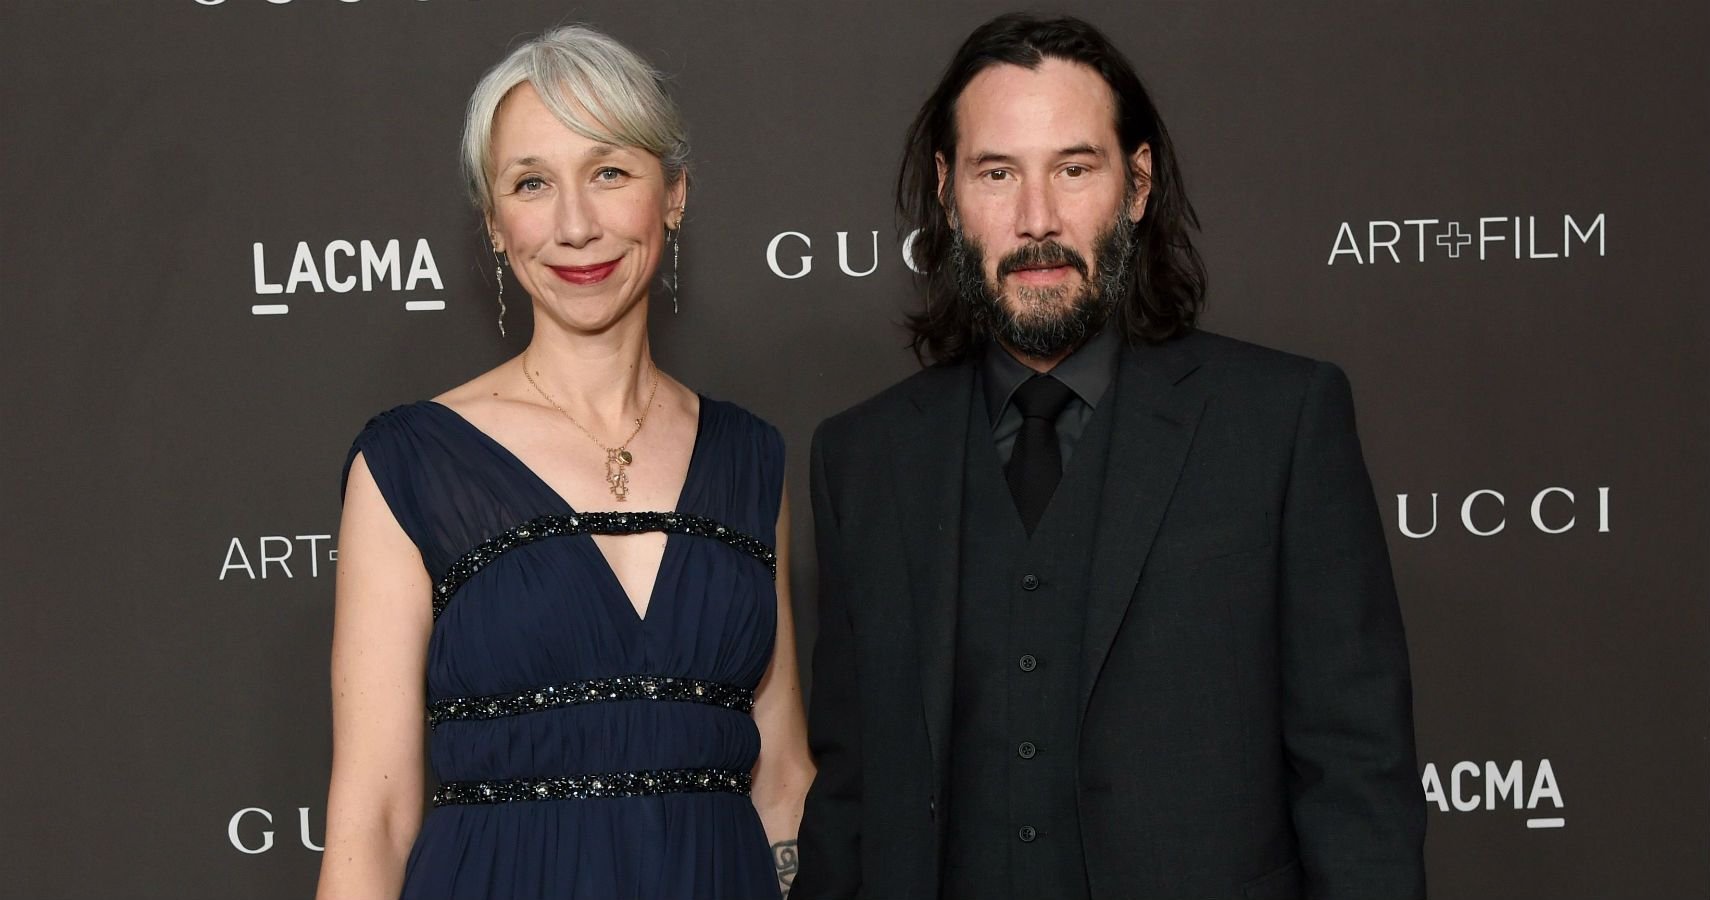 Here's Why Fans Think Keanu Reeves Is Married